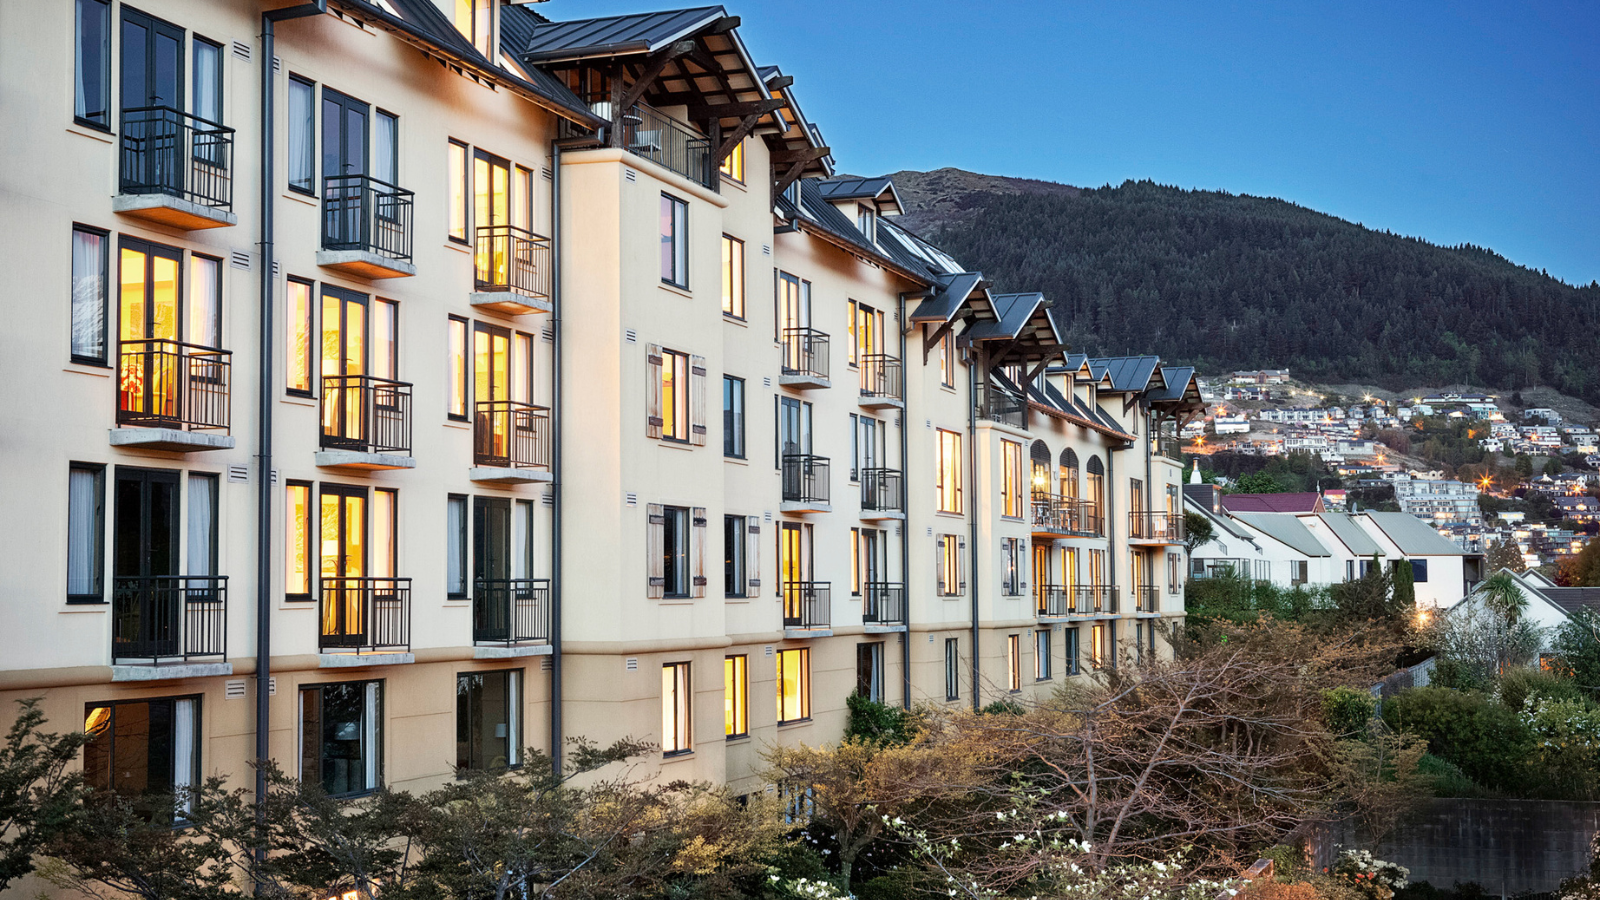 Hotel St Moritz Queenstown - MGallery has already achieved gold certification under Qualmark’s GSTC-recognised standards for sustainable tourism businesses.